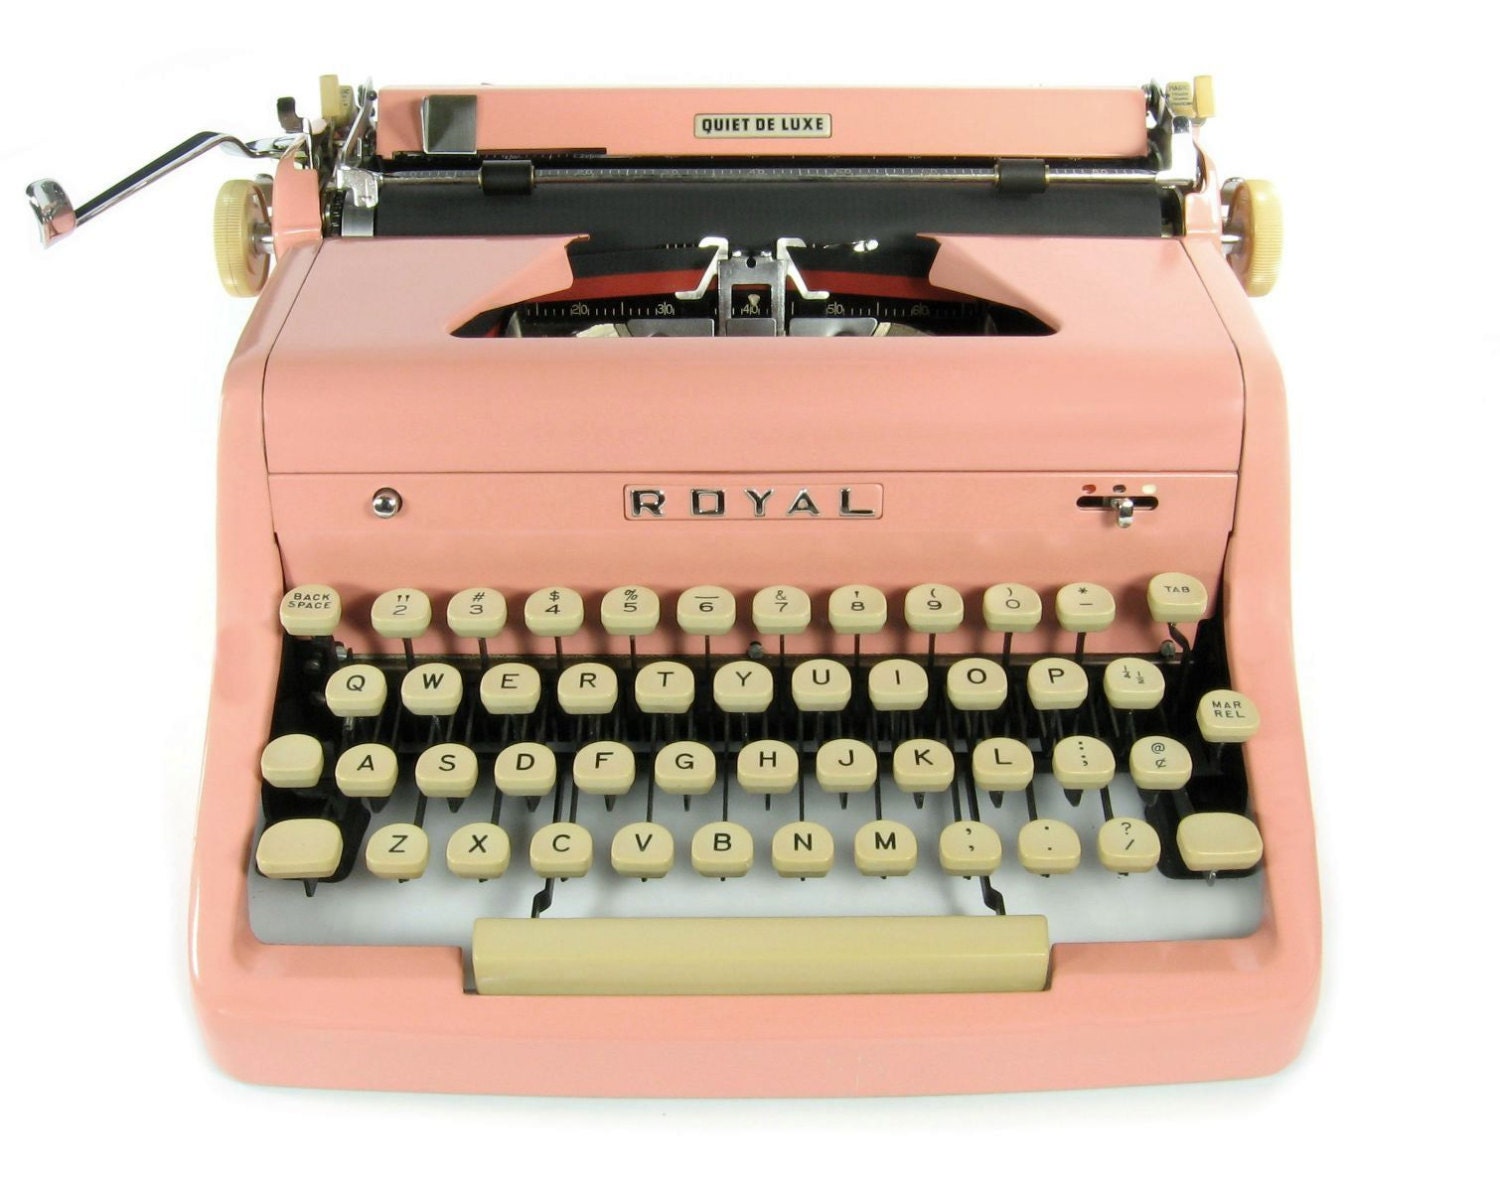 1955 Pink Royal Typewriter Quiet DeLuxe with Original Case and